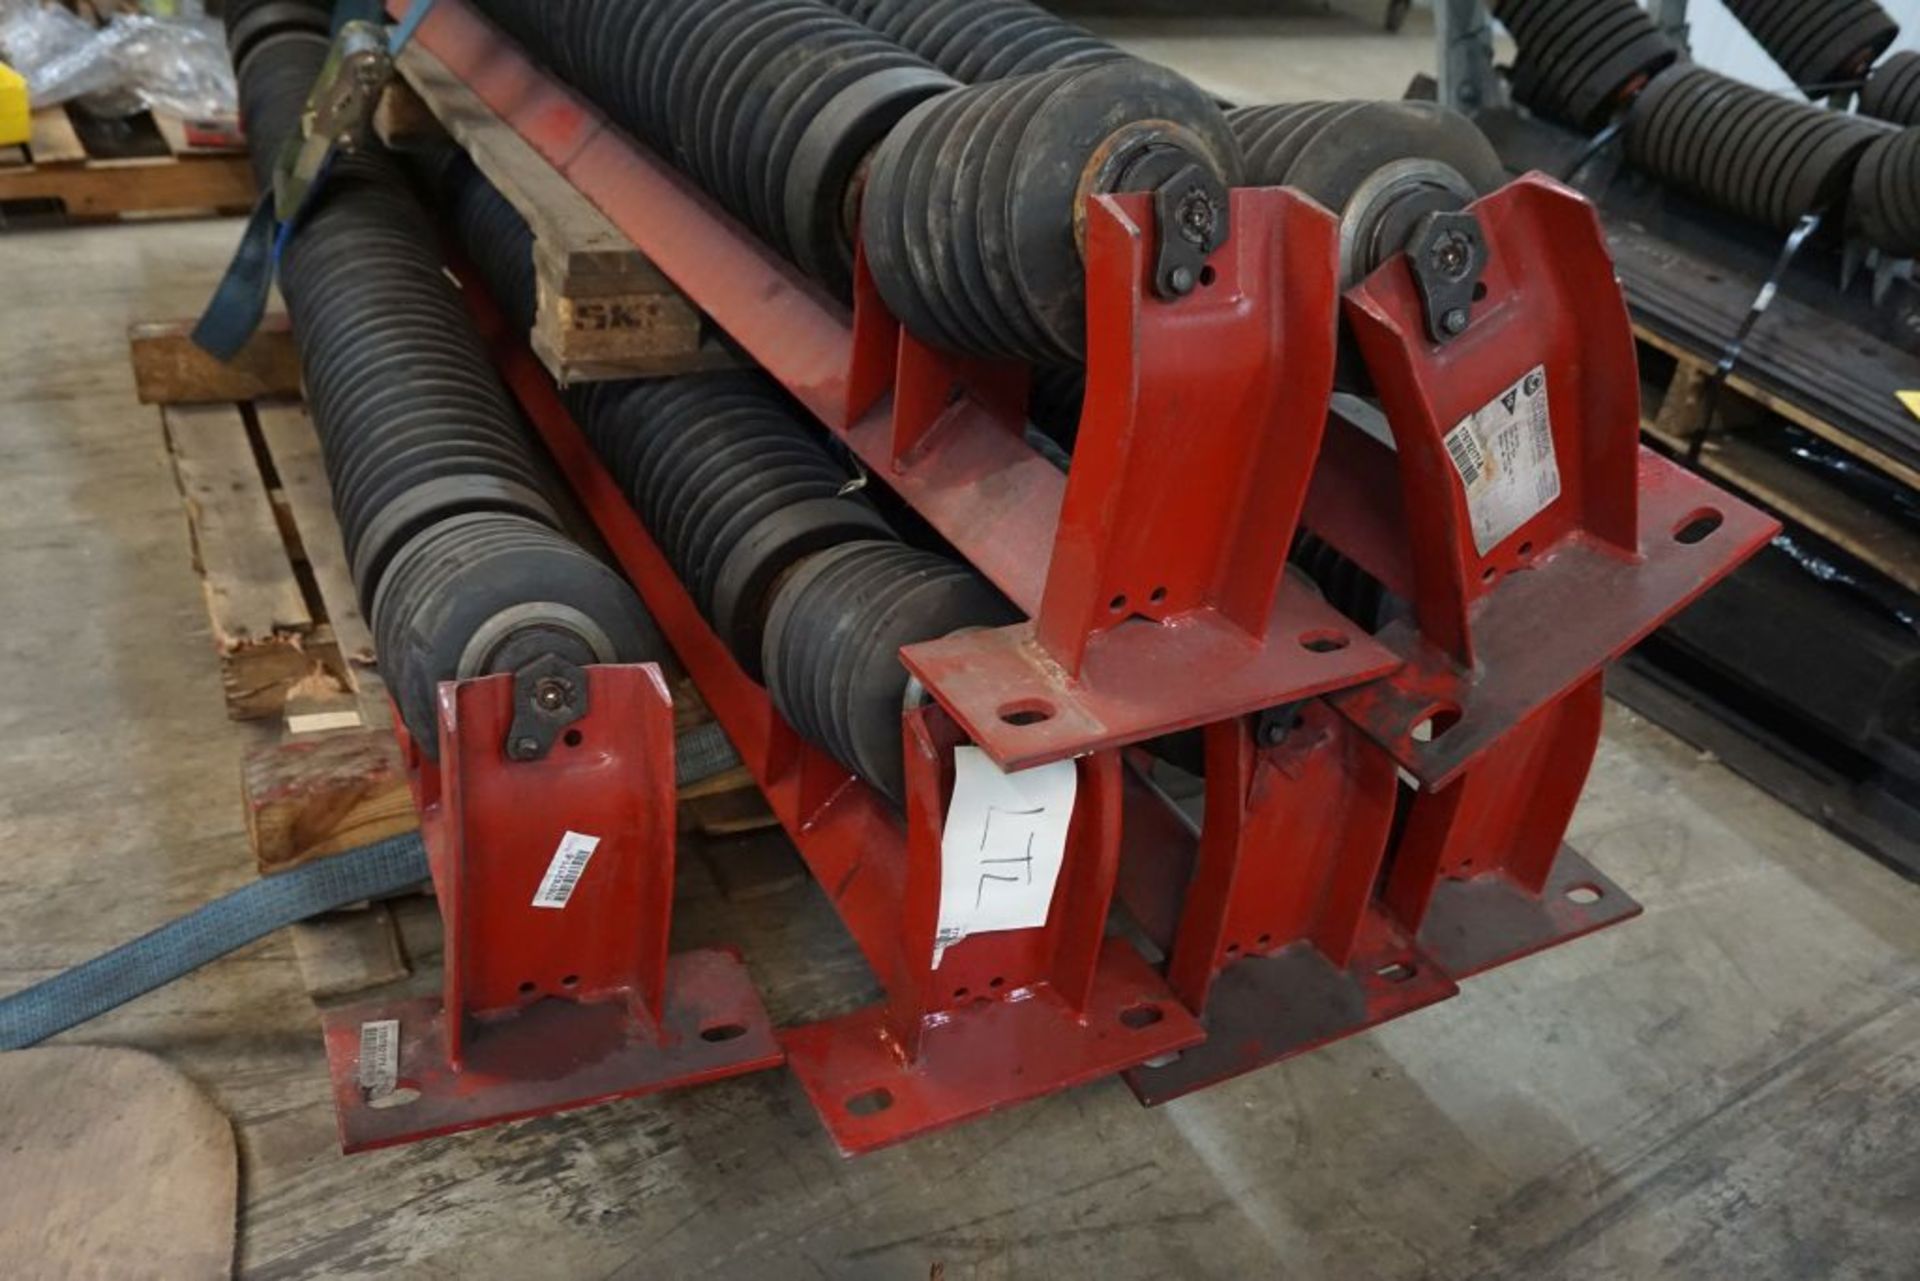 Lot of (6) 6"Diameter Training Idlers|75" Working Width; 90" Overall Width|Lot Loading Fee: $5.00 - Image 2 of 6